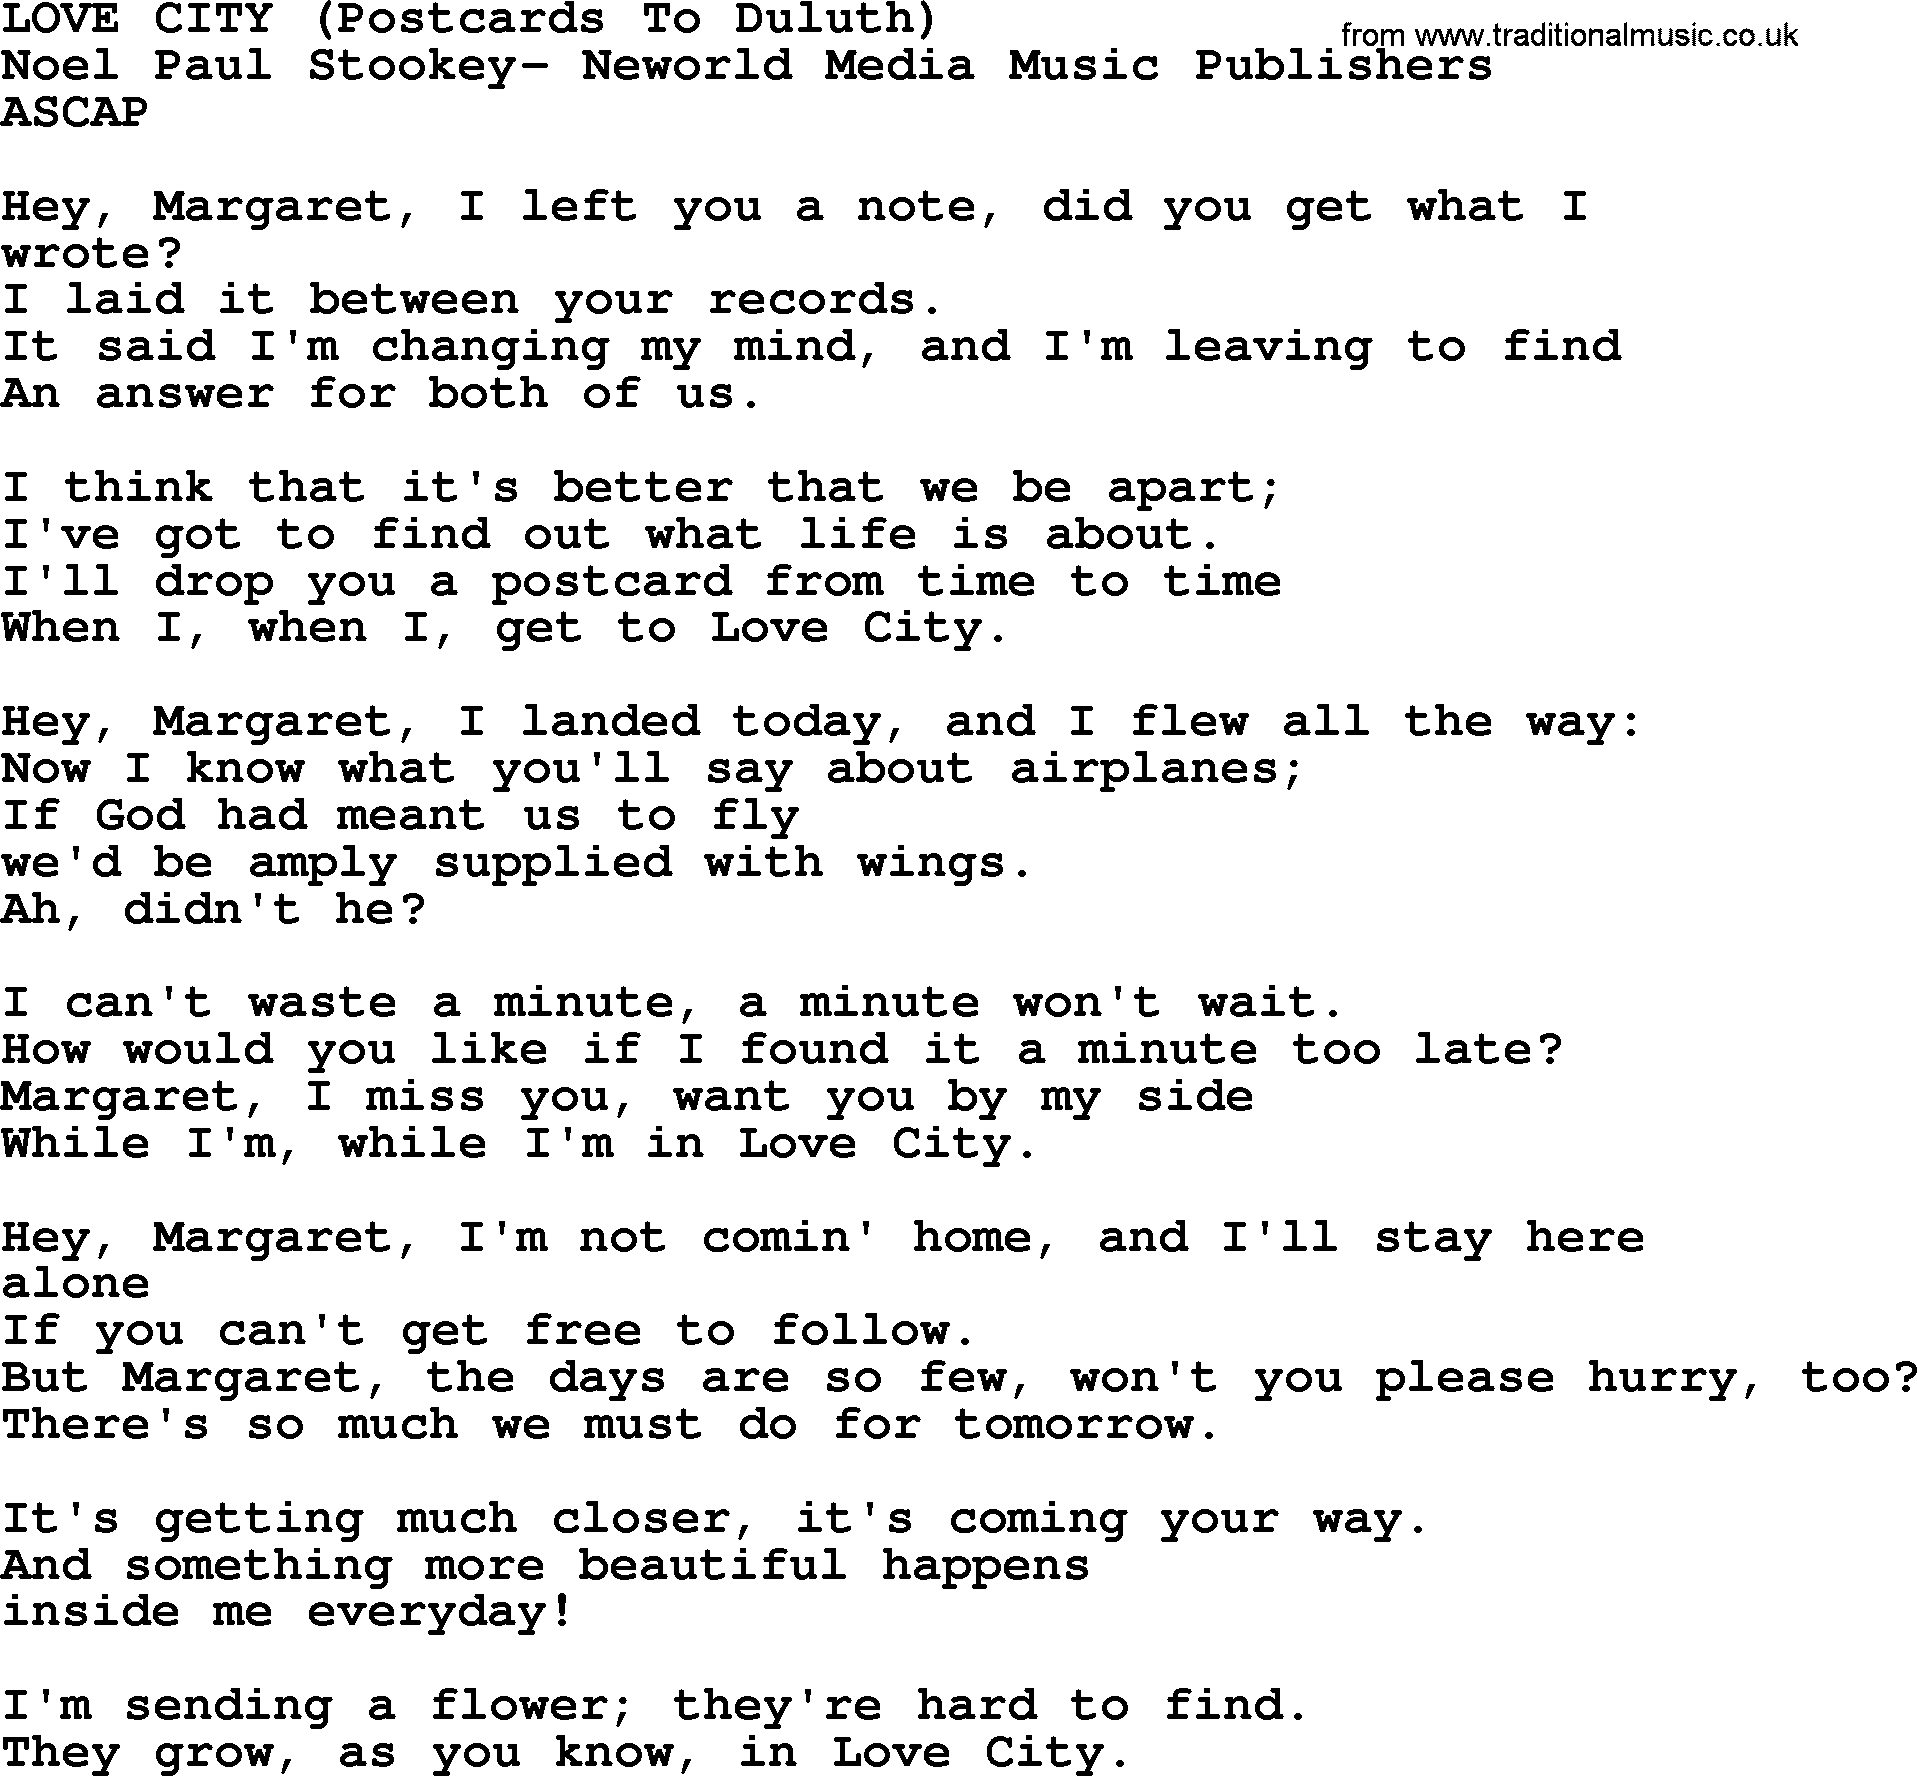 Peter, Paul and Mary song Love City (postcards To Duluth) lyrics